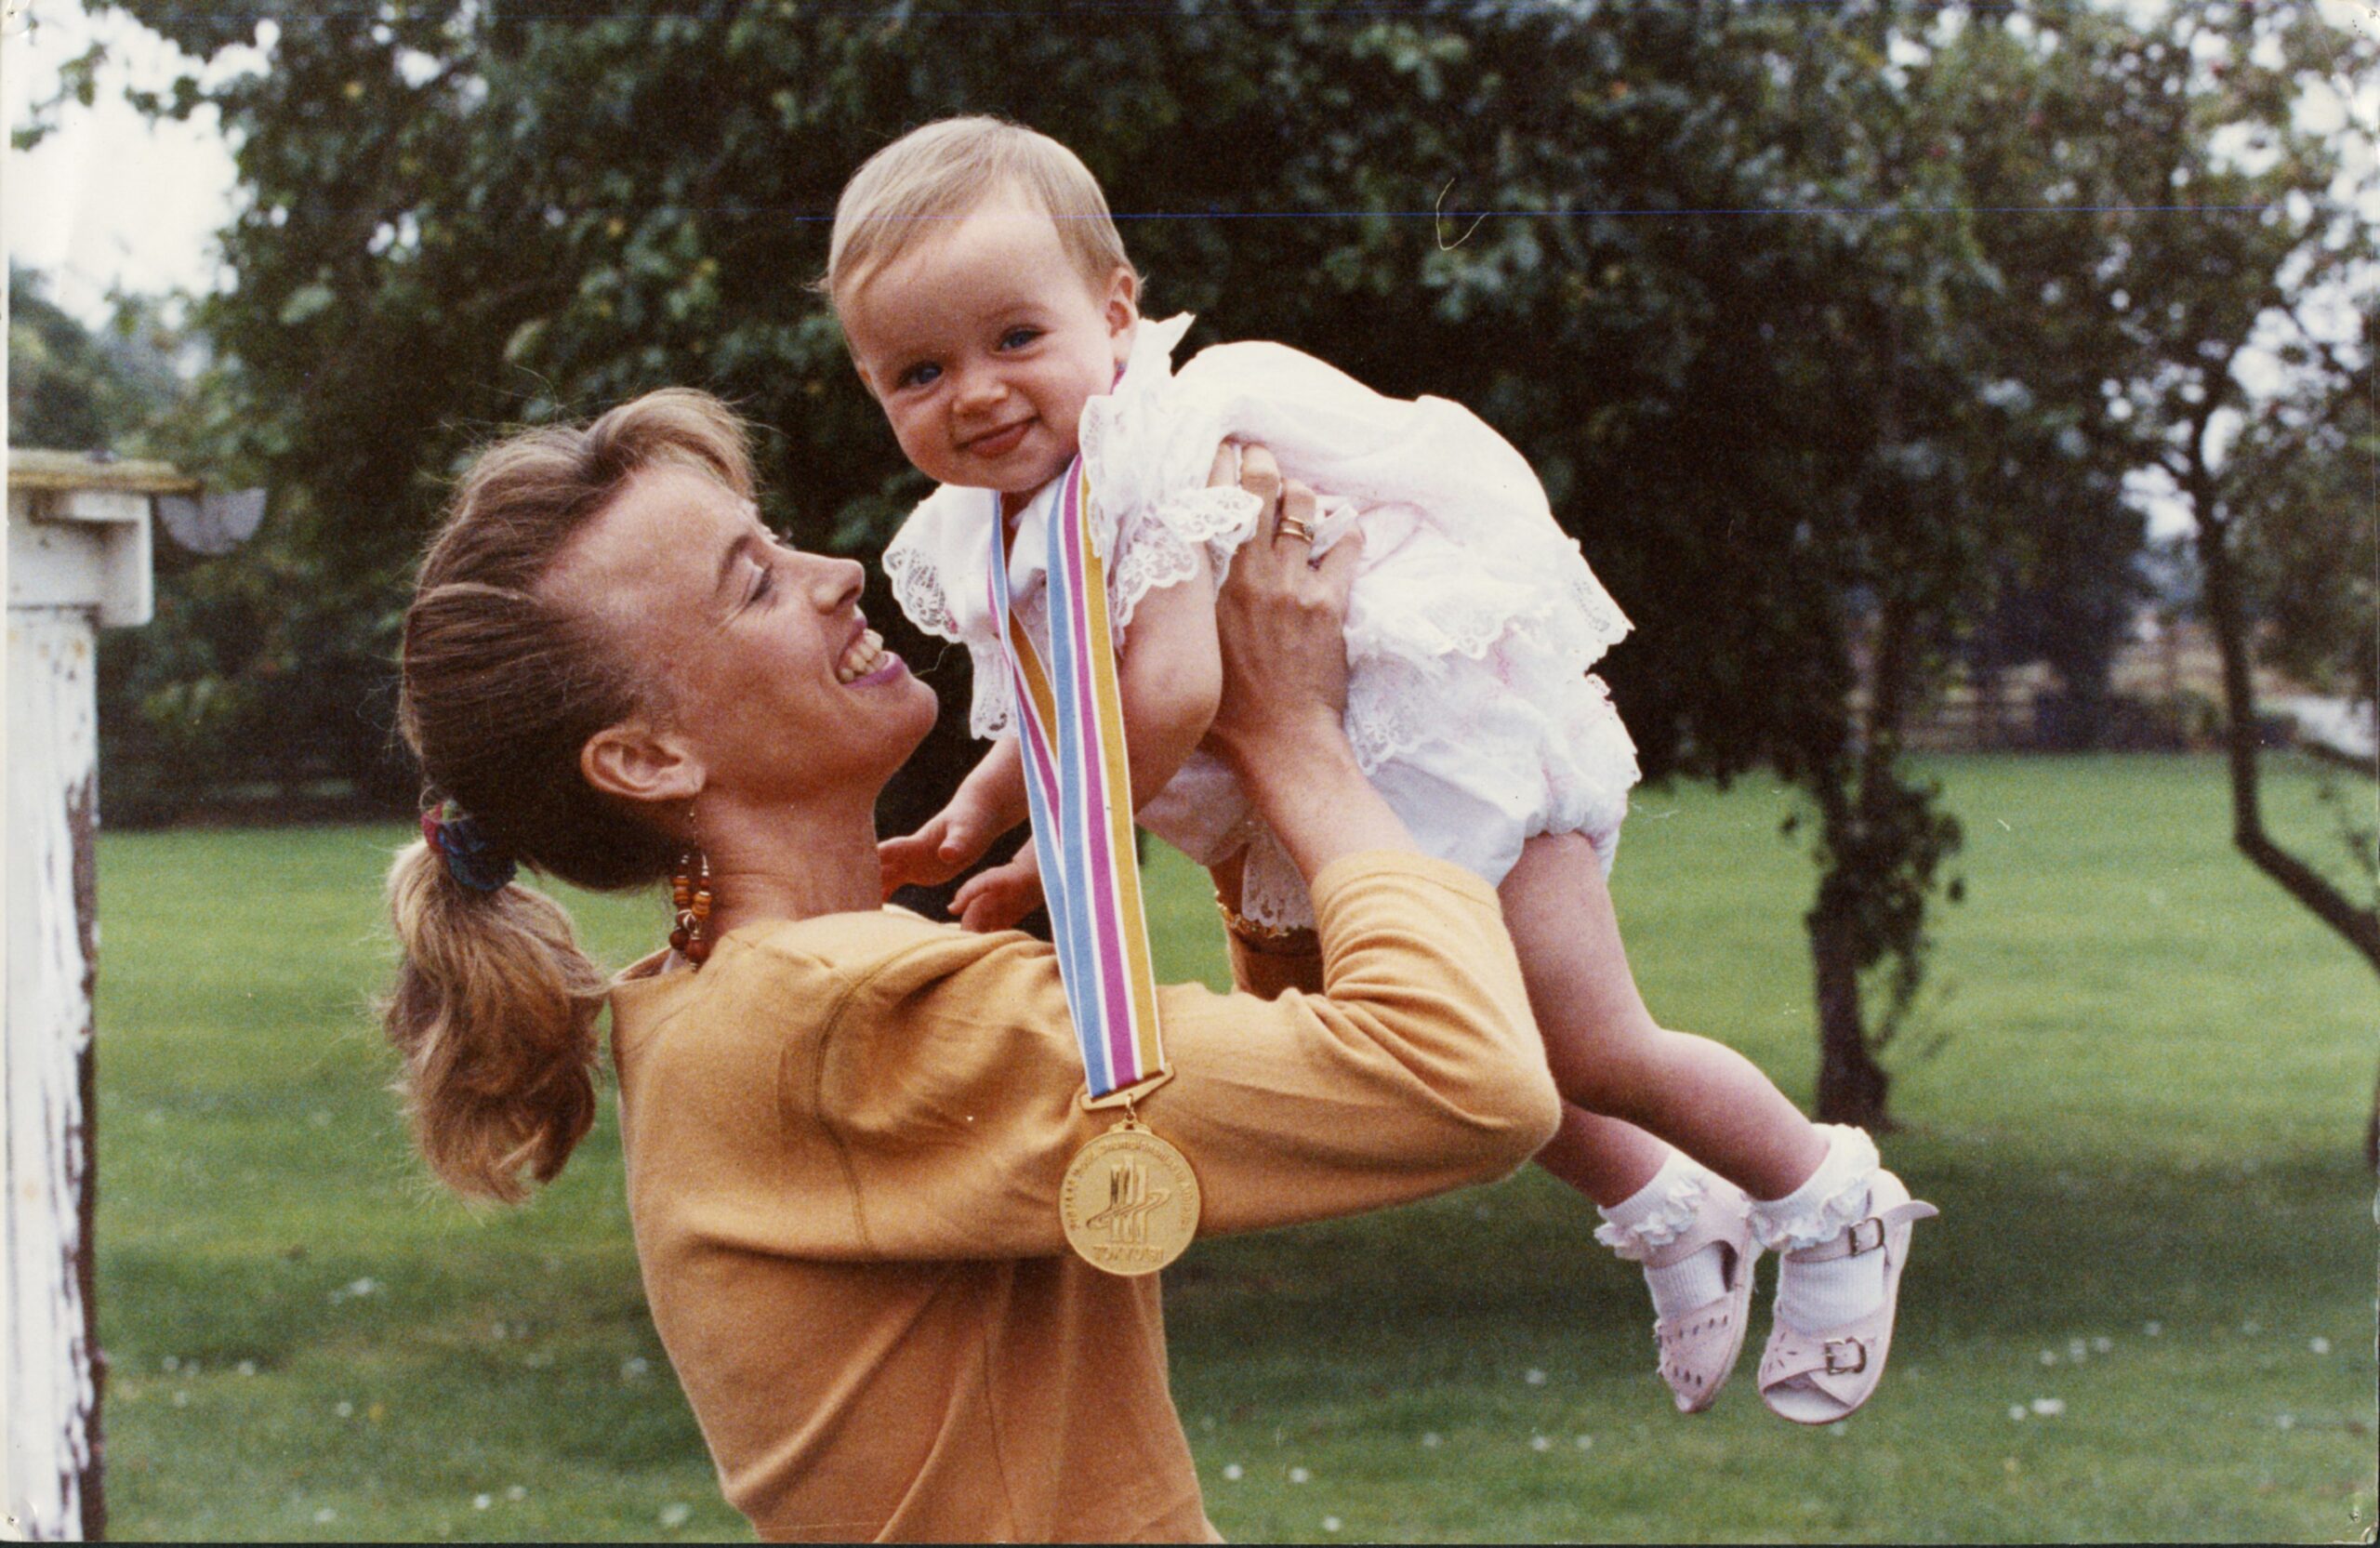 Liz McColgan holding daughter Eilish above her head in 1991. The baby is wearing a medal around her neck.